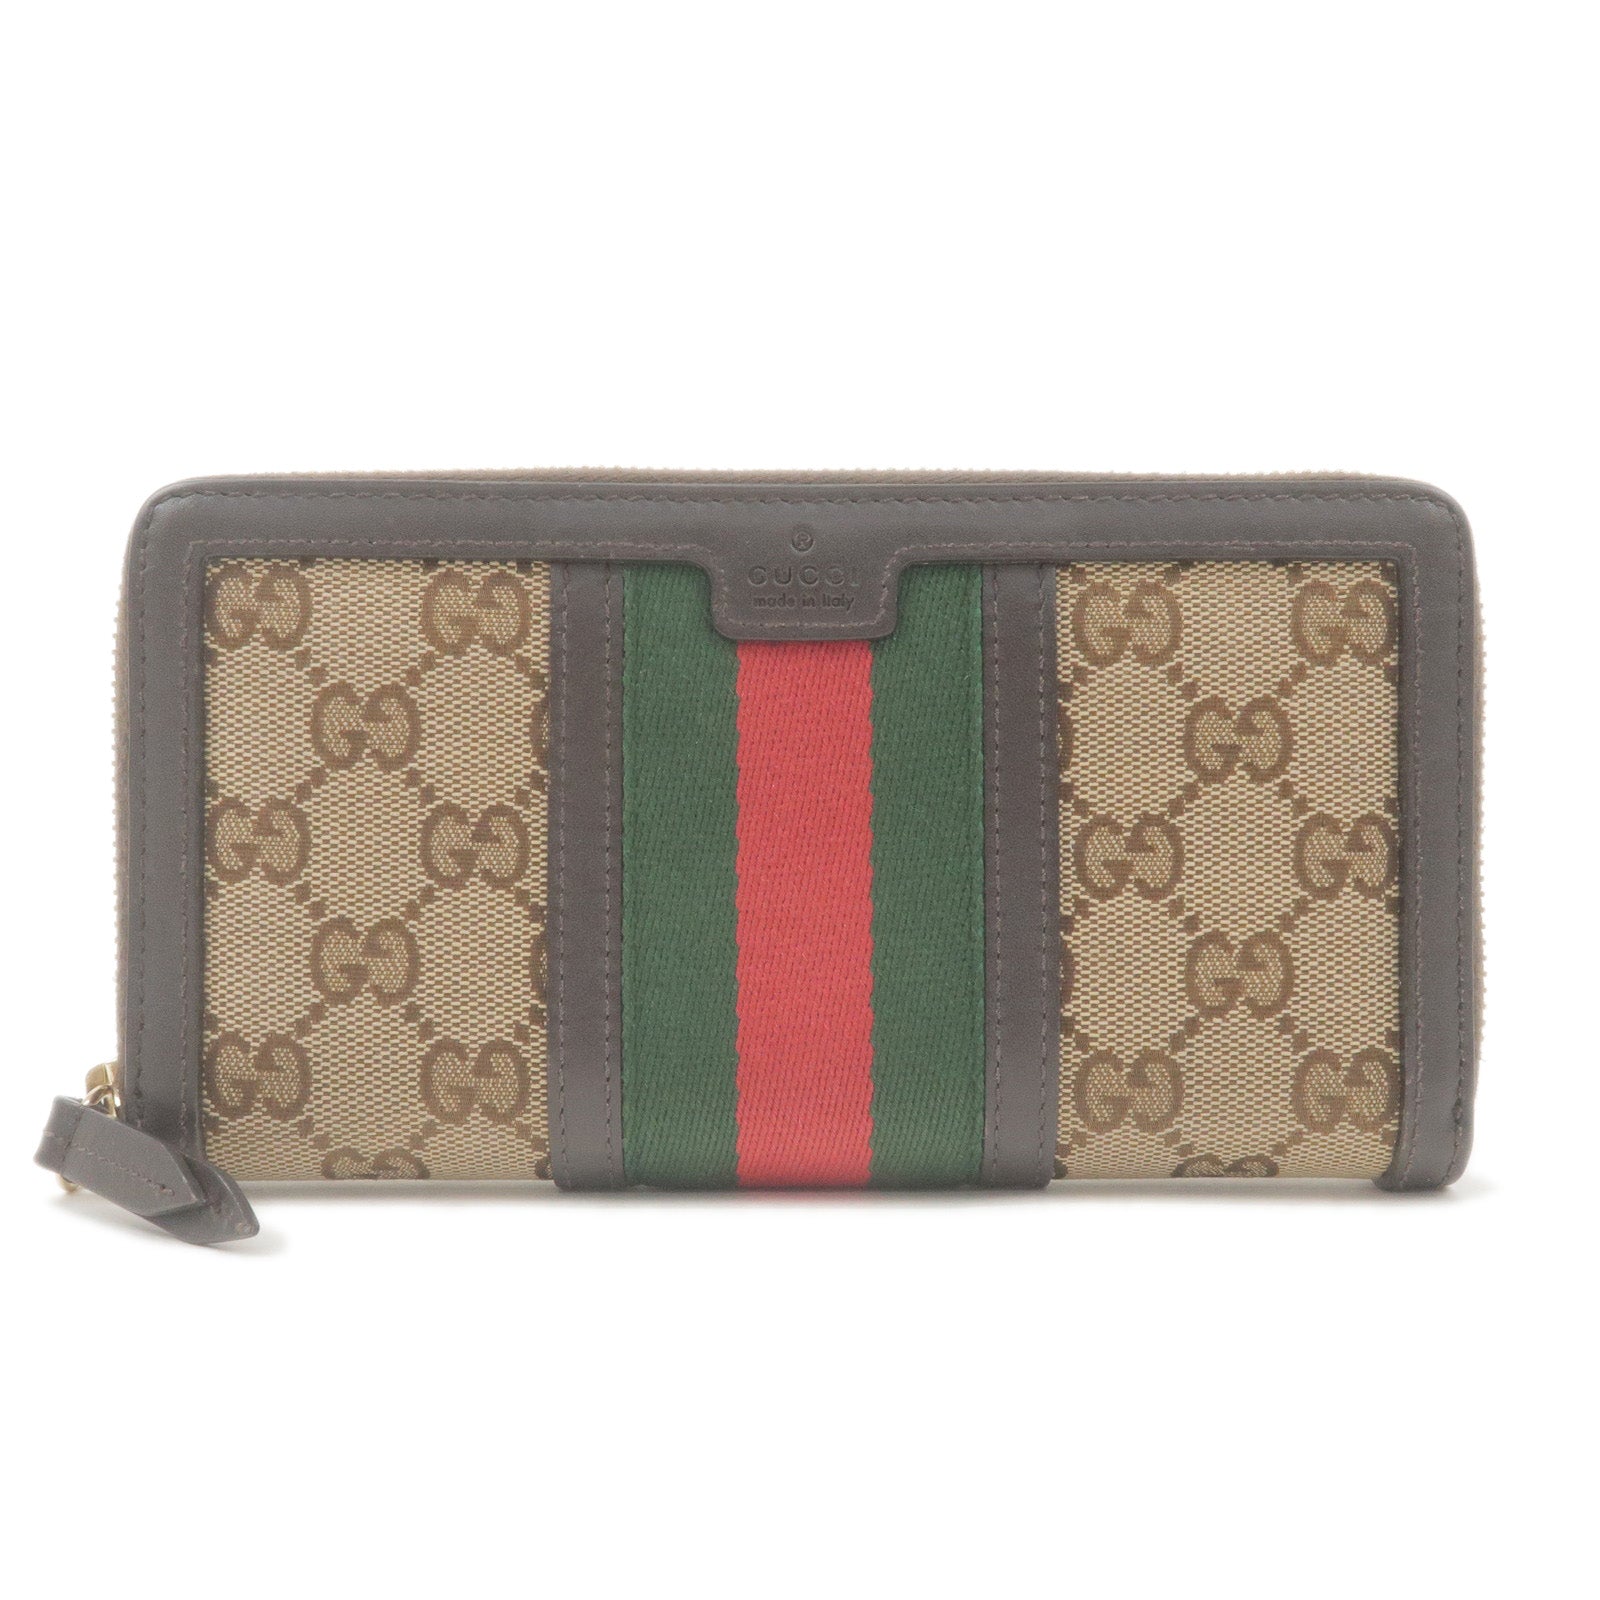 GUCCI-Sherry-GG-Canvas-Leather-Long-Wallet-Beige-Dark-Brown-406754